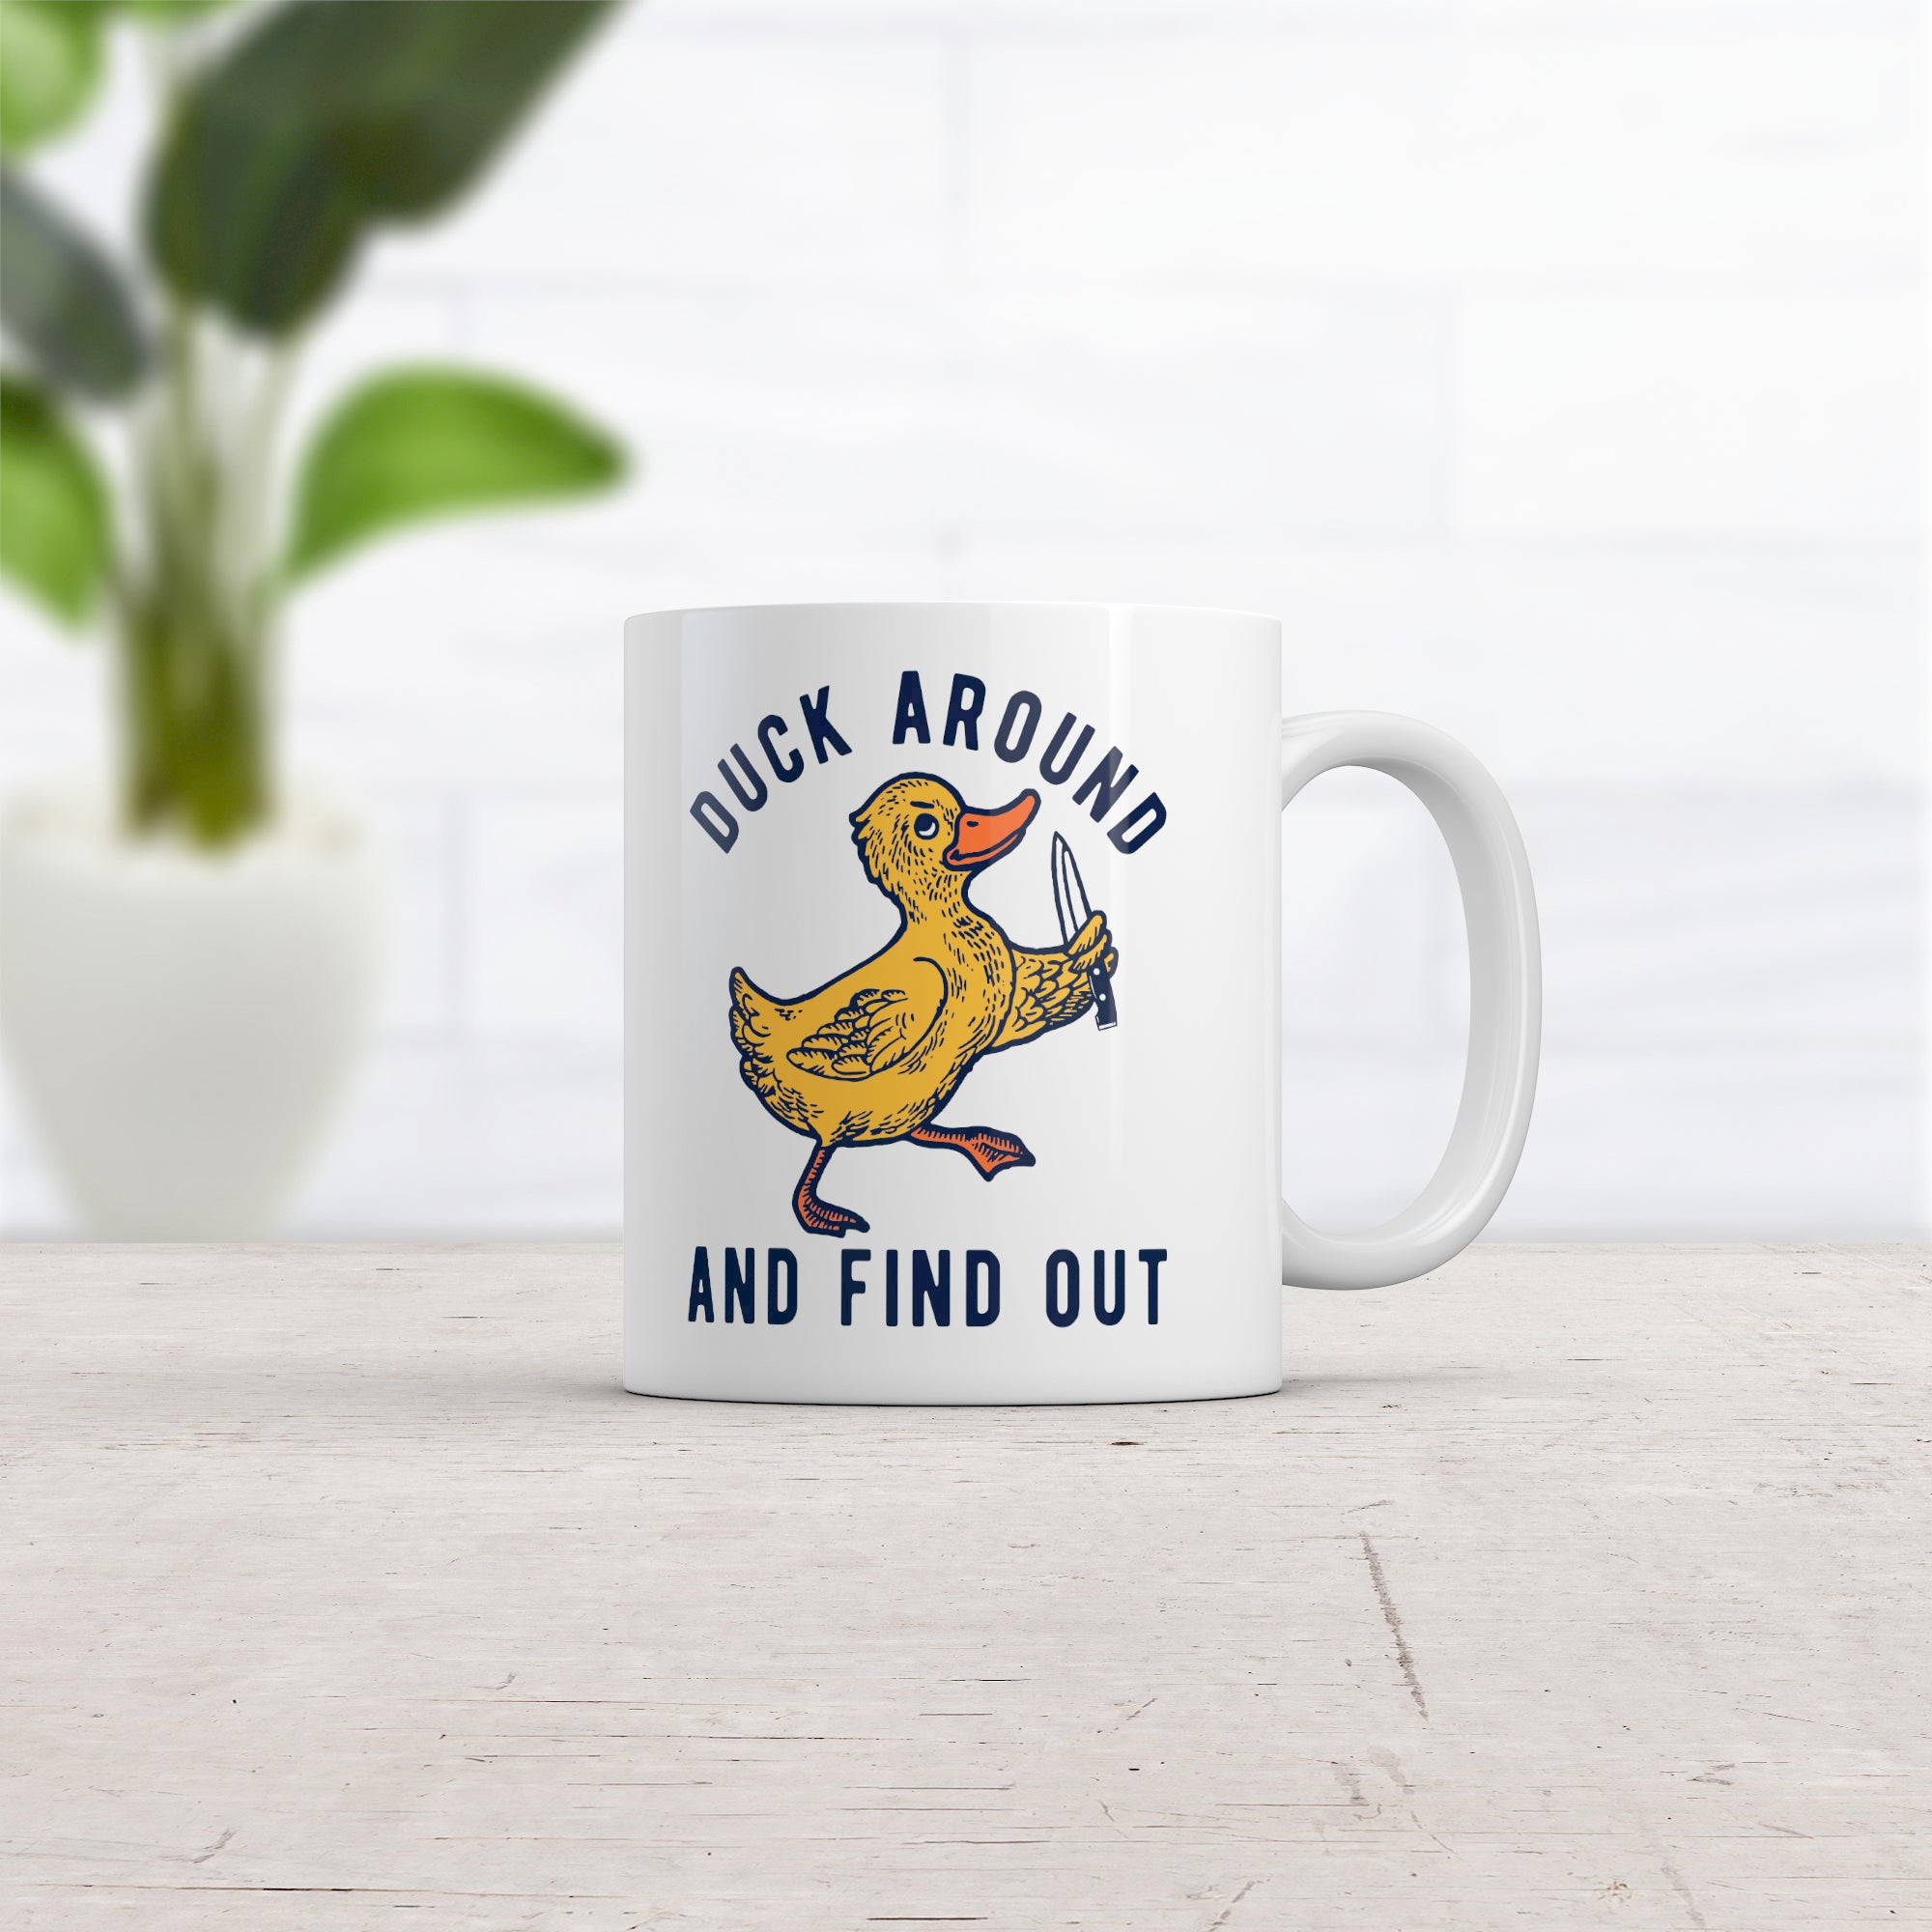 Funny White Duck Around And Find Out Coffee Mug Nerdy animal sarcastic Tee